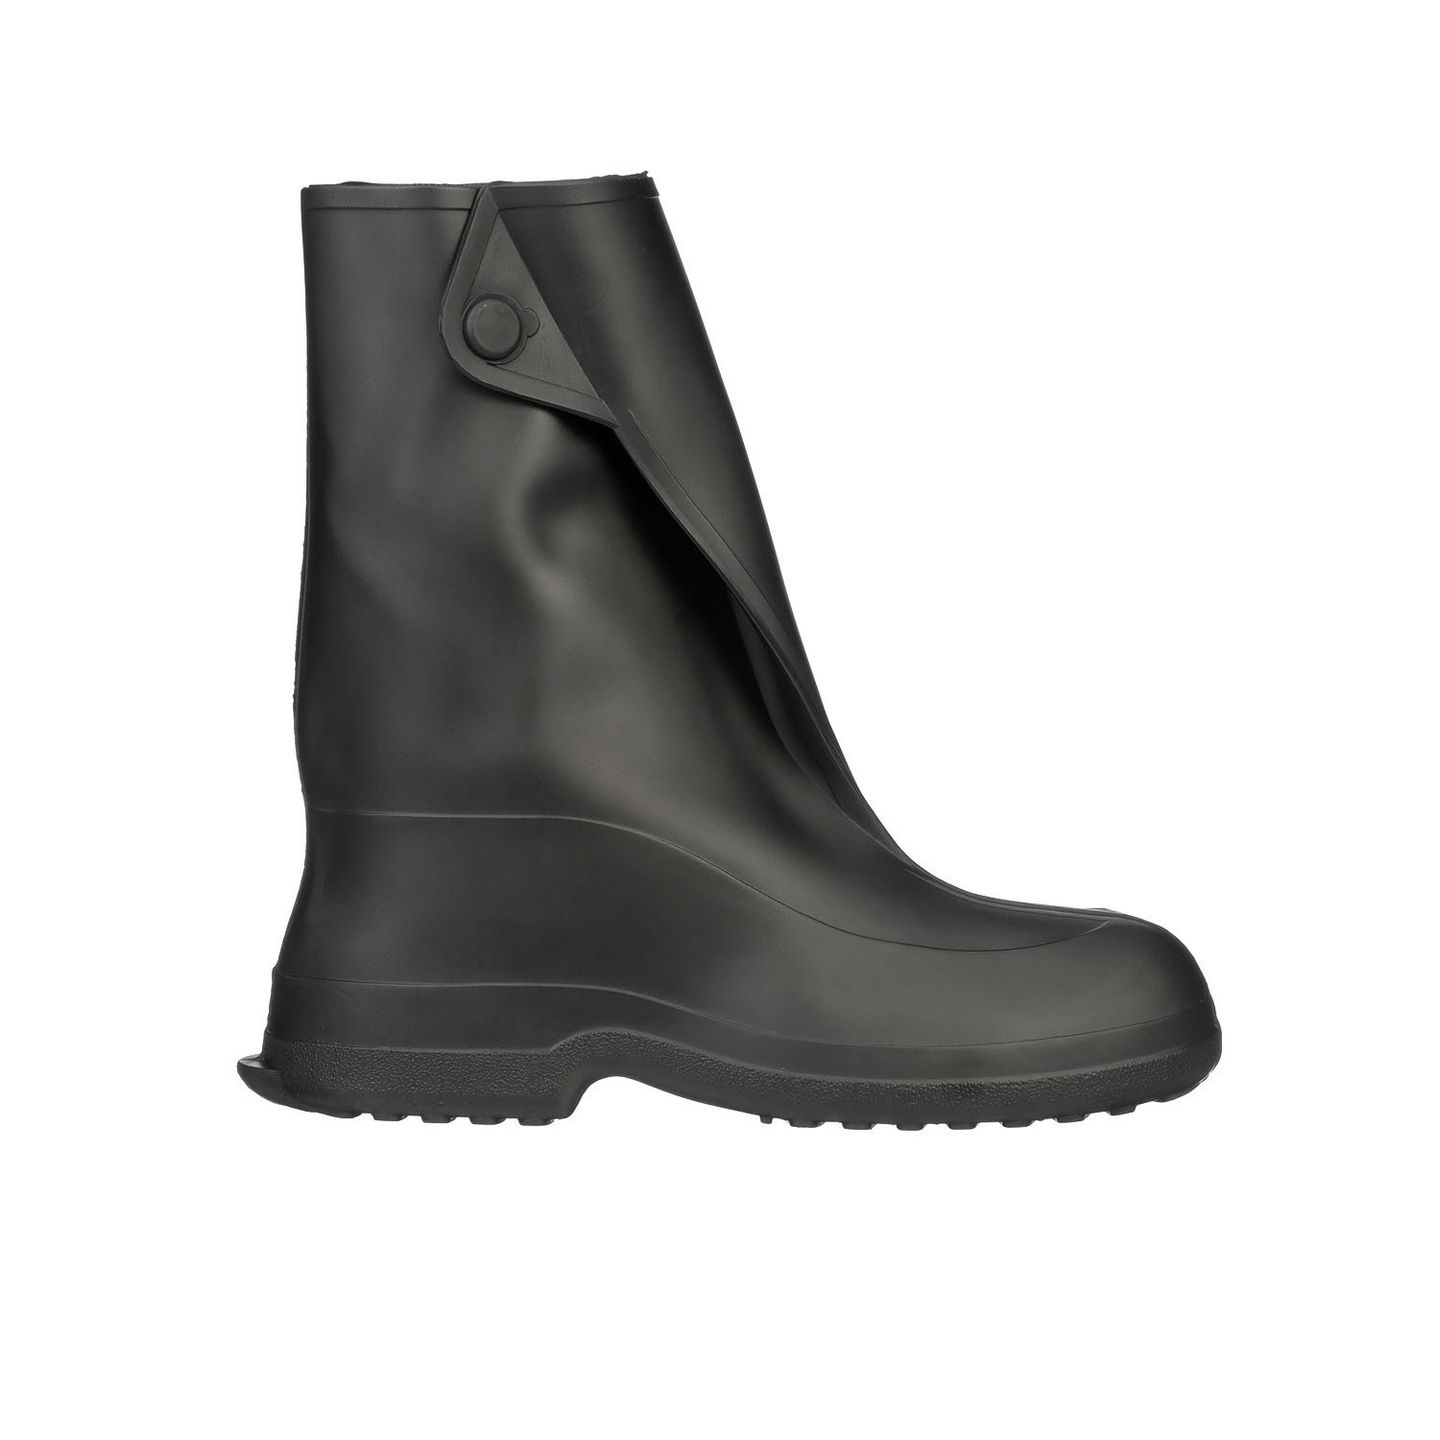 Latex Overboots; Footwear Size (US Men's): 8, 11 and 13; Closure Style ...